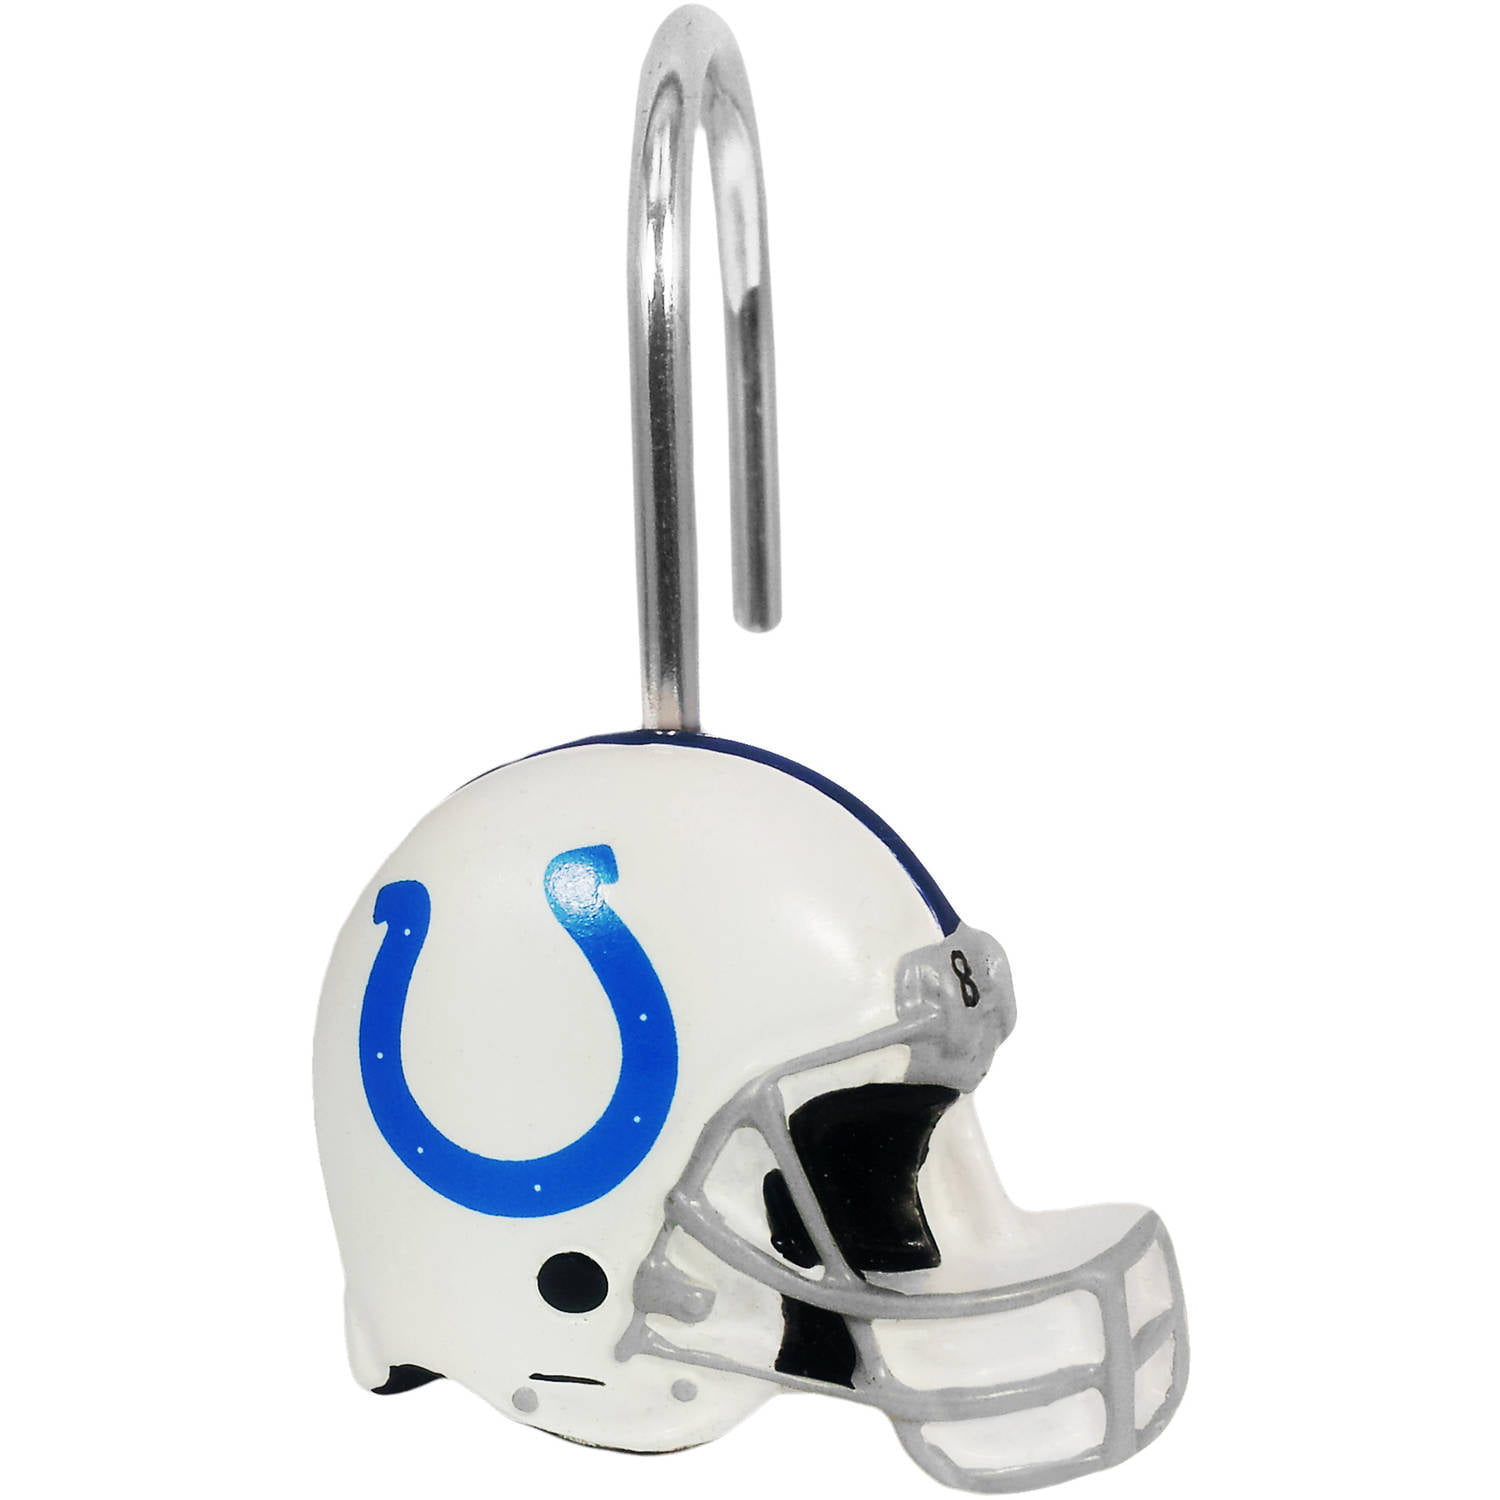 Nfl Indianapolis Colts Shower Hooks 12, Indianapolis Colts Shower Curtain